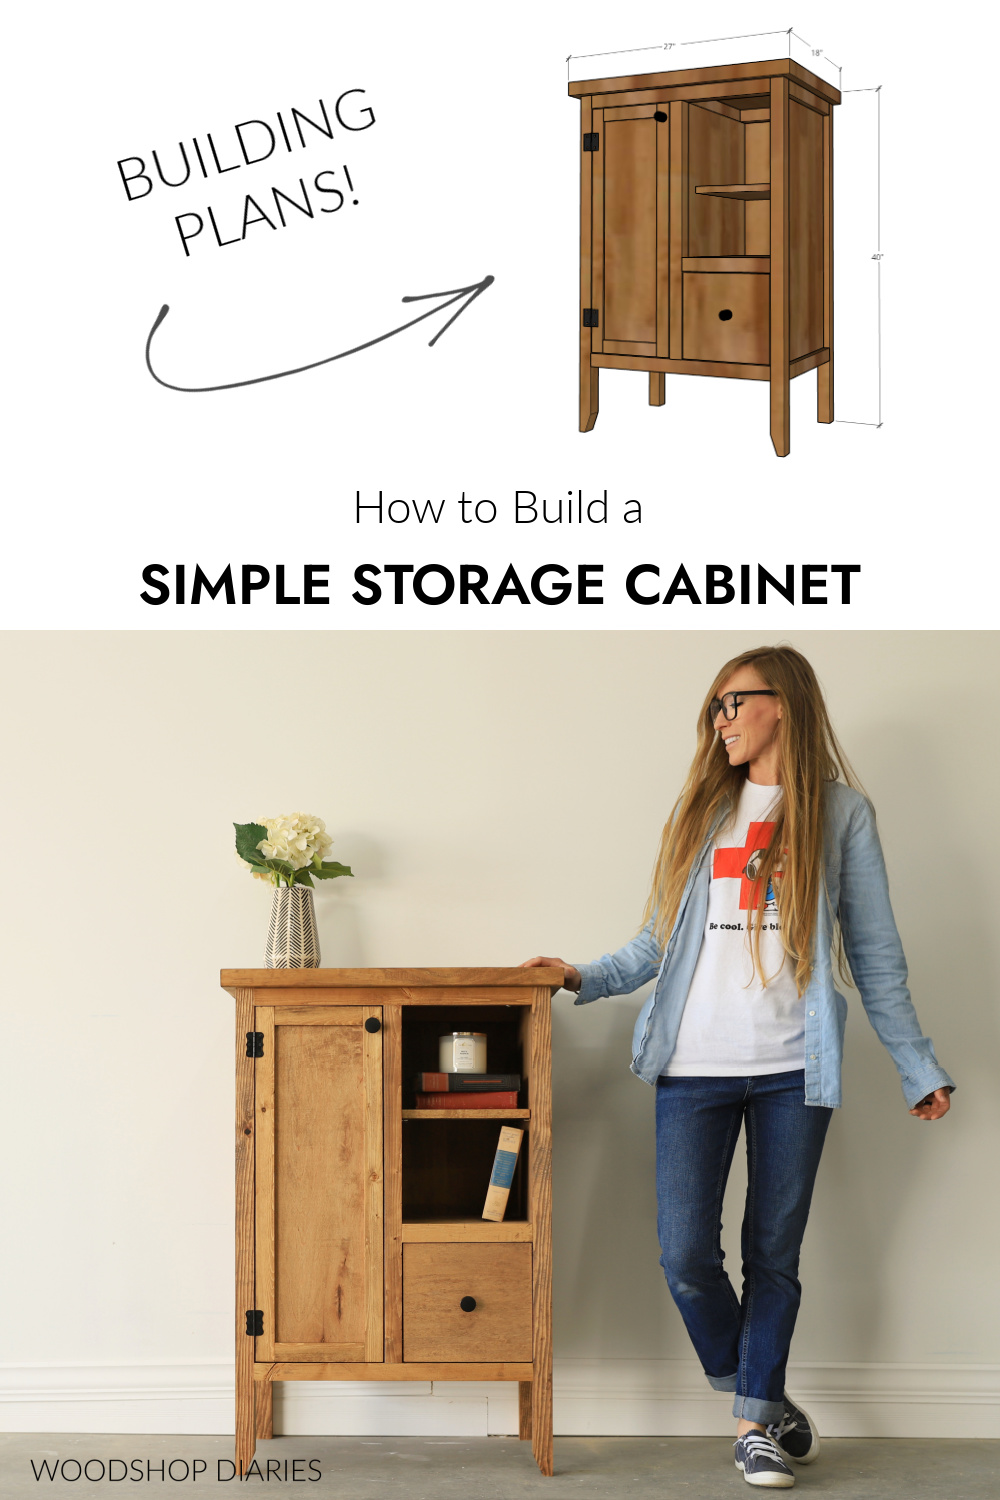 Pinterest collage image showing Shara Woodshop Diaries standing next to coffee bar cabinet at bottom and dimensional diagram at top with text "how to build a simple storage cabinet"